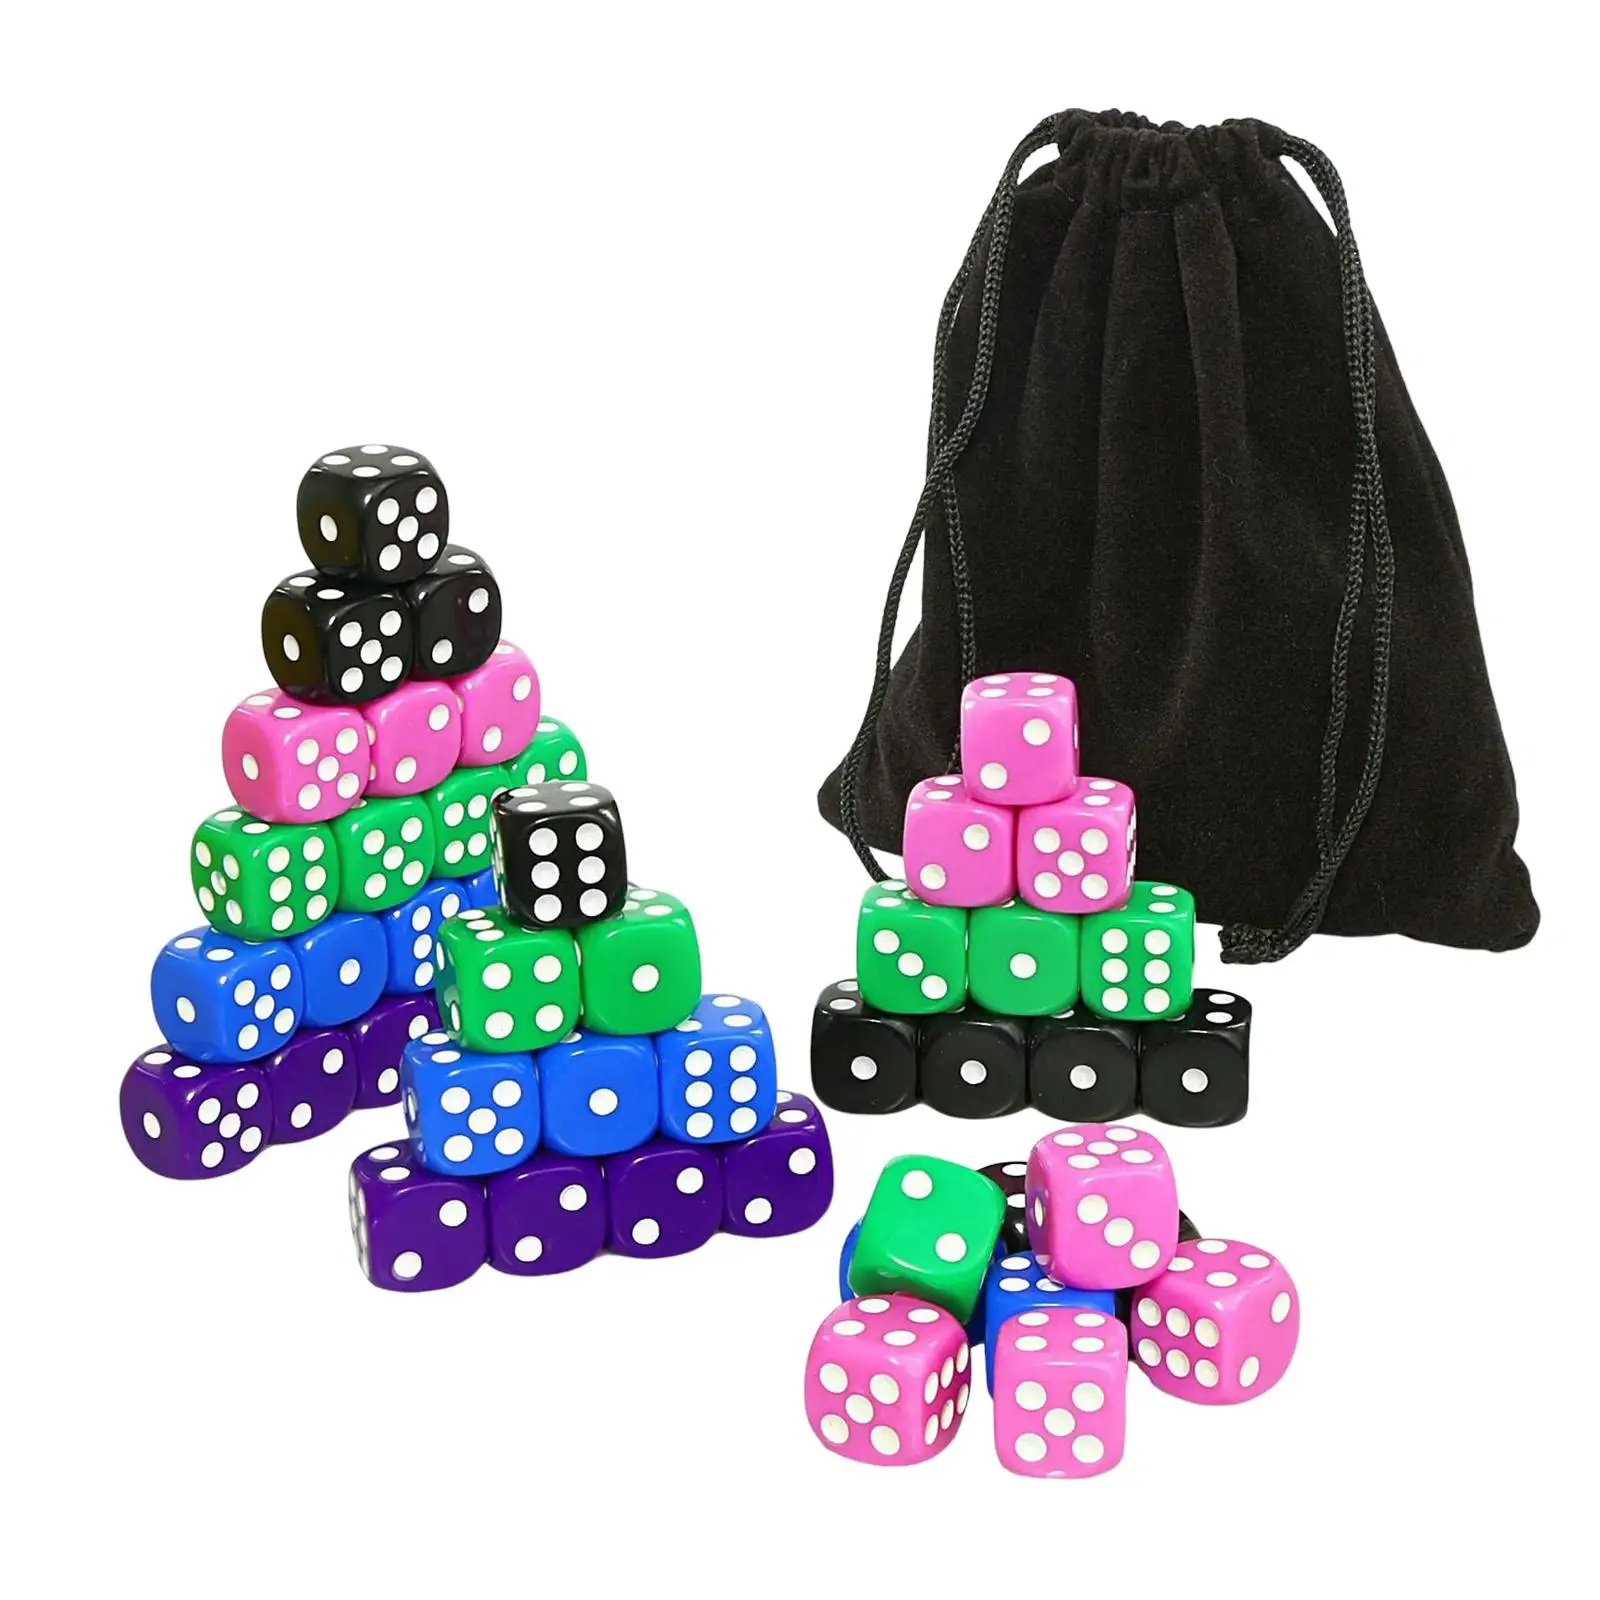 50x D6 Six Sided Dices Set with Drawstring Dice Bag Toys for MTG 16mm Acrylic Dice Board Game Role Playing Games